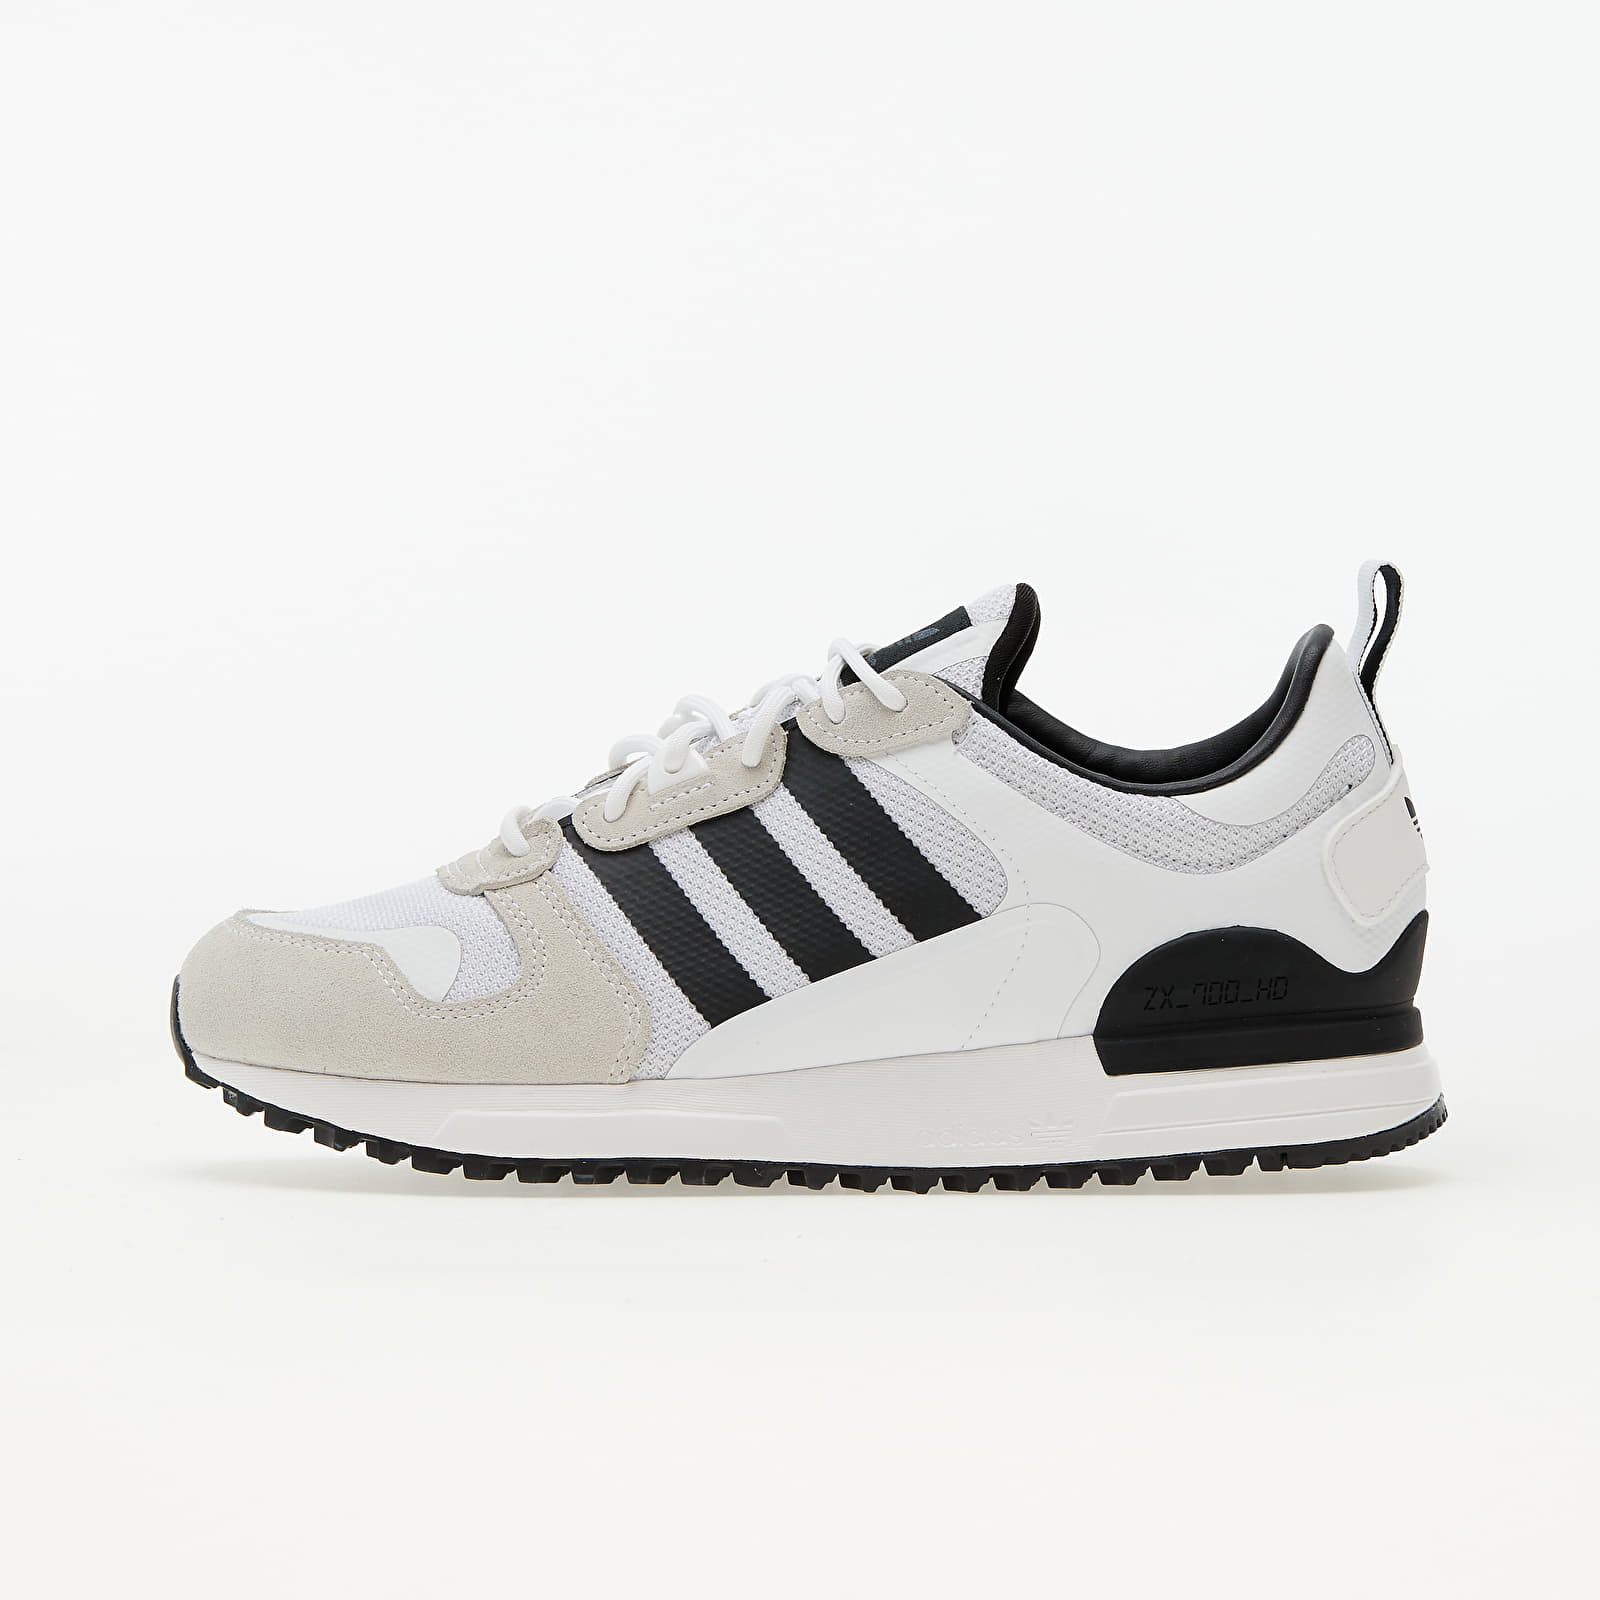 Chaussures et baskets homme adidas ZX 700 HD Ftw White/ Core Black/ Ftw White